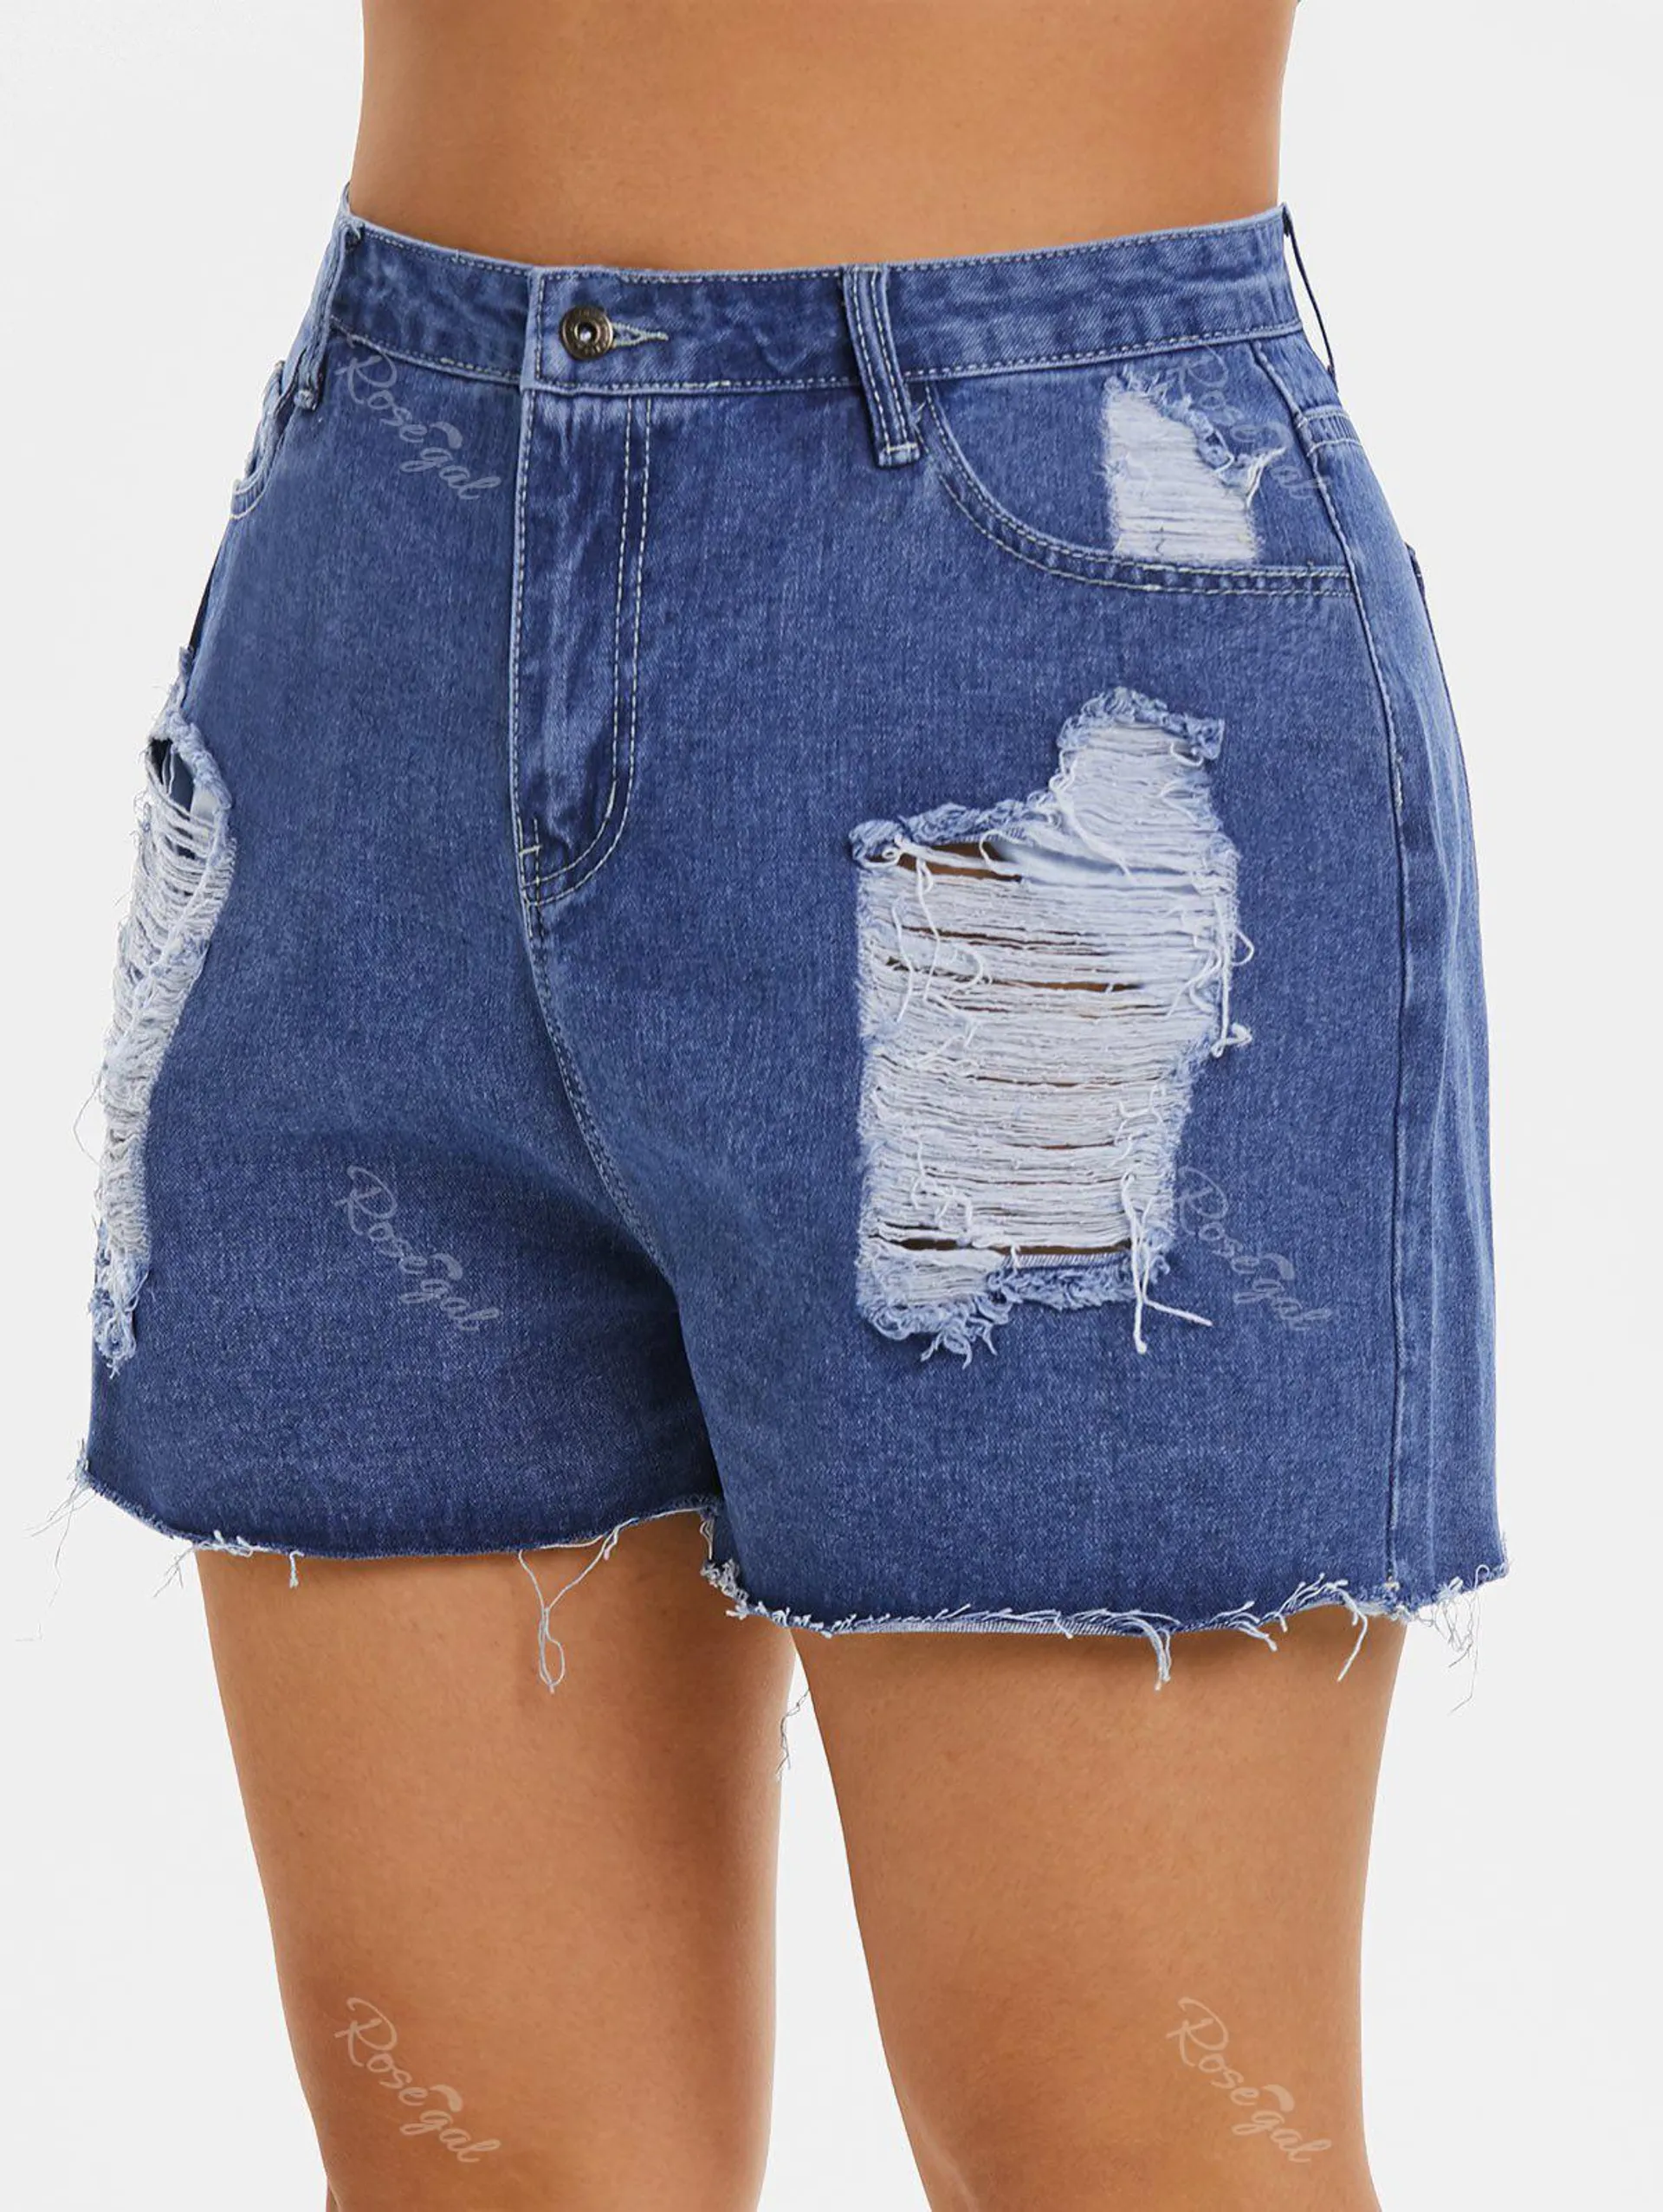 Plus Size & Curve Distressed Frayed Jean Shorts - 4xl